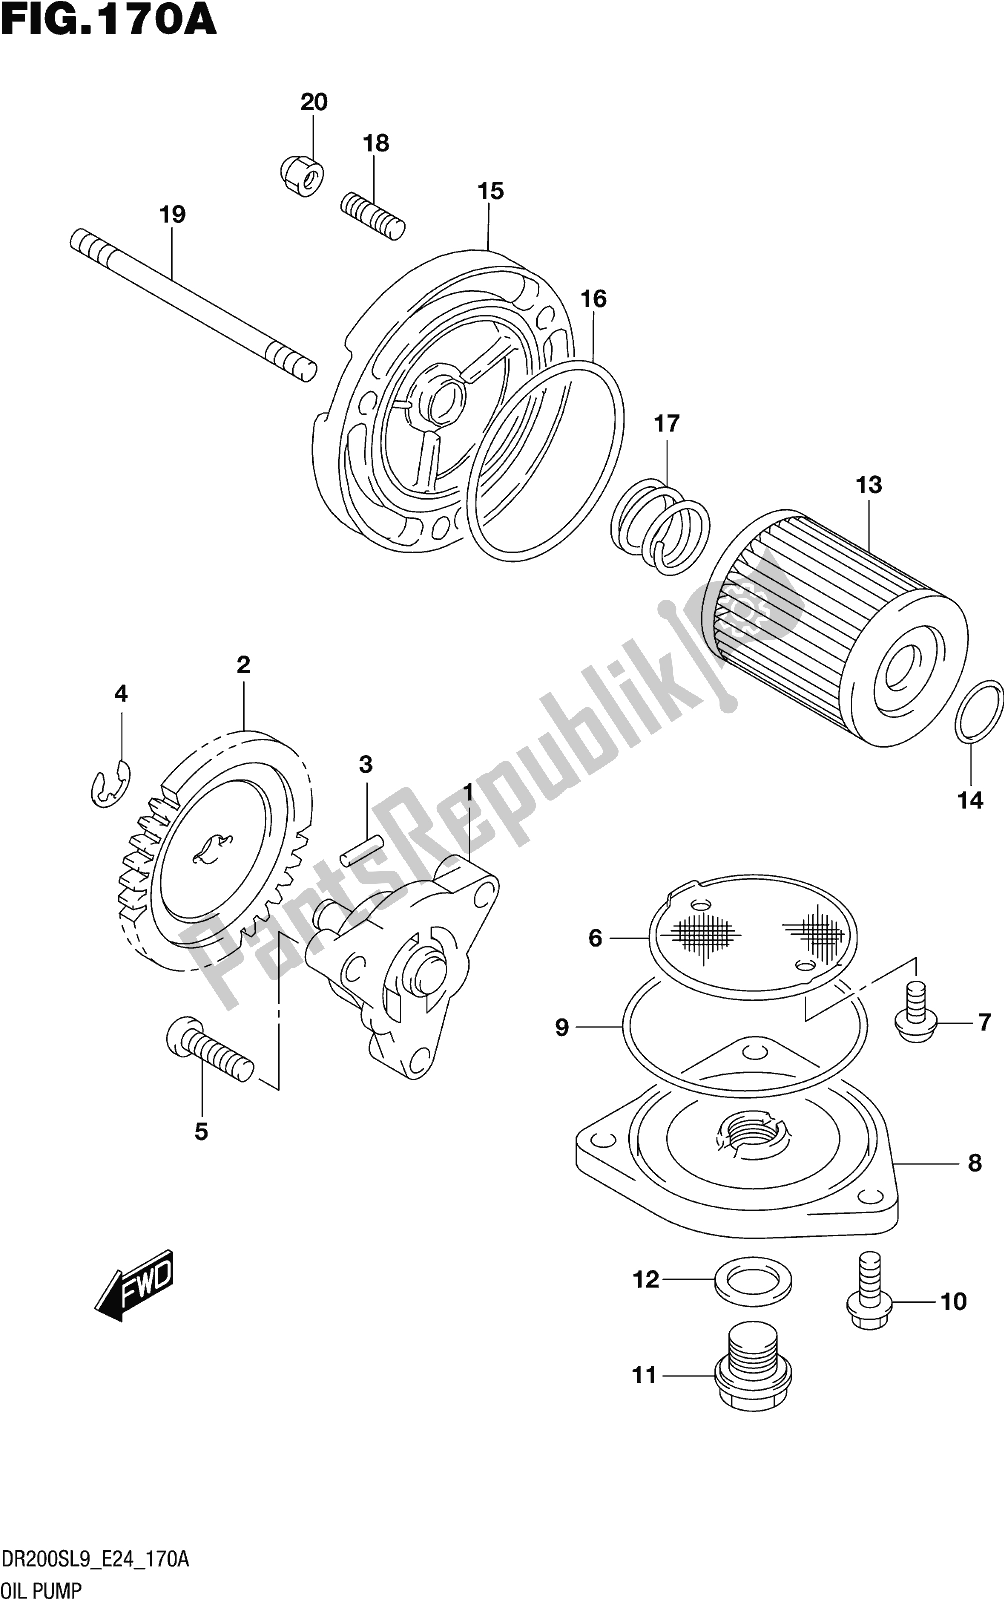 All parts for the Fig. 170a Oil Pump of the Suzuki DR 200S 2019